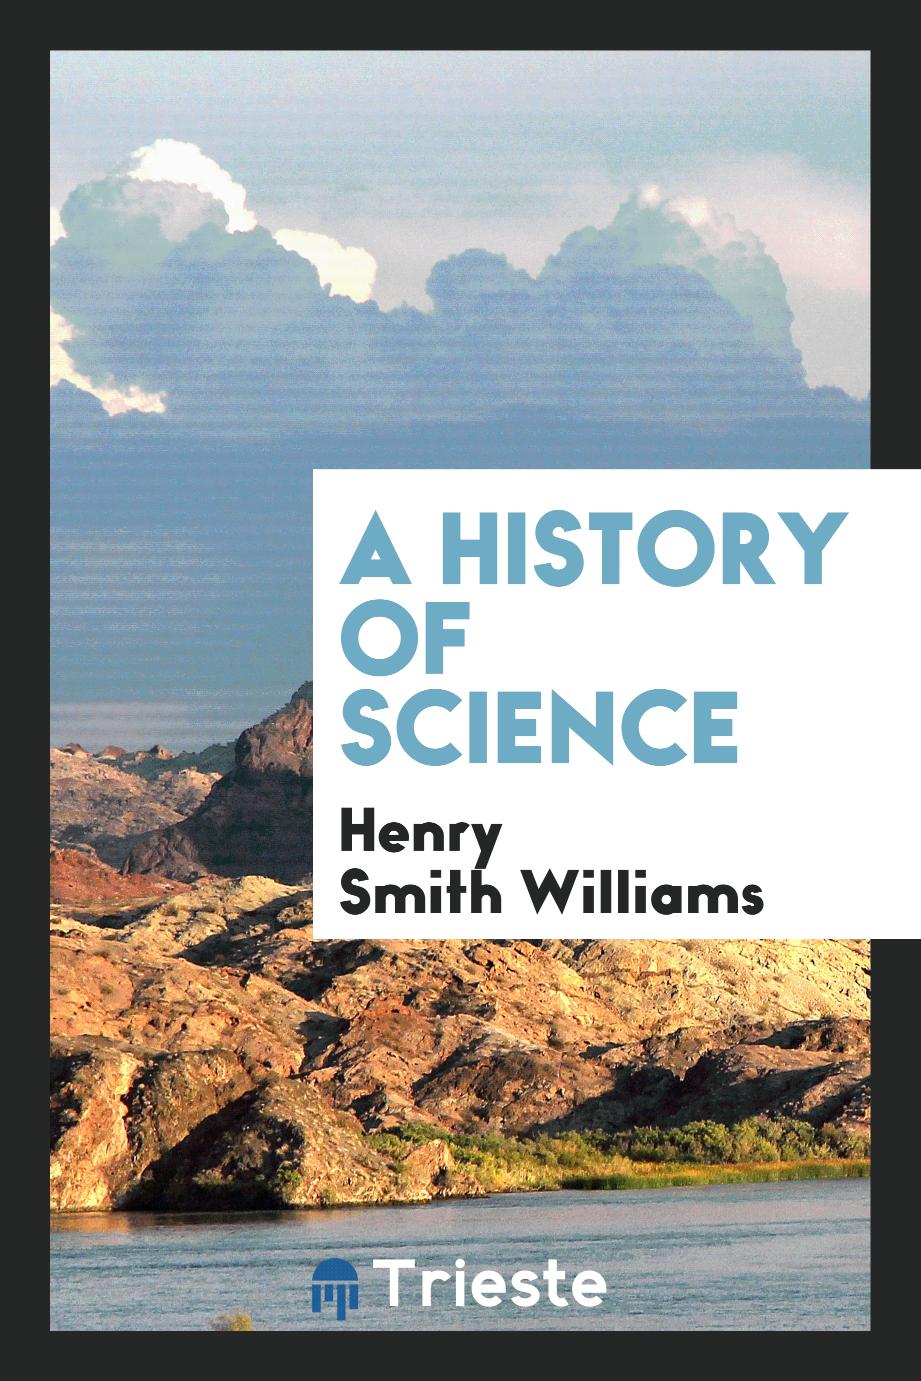 A history of science